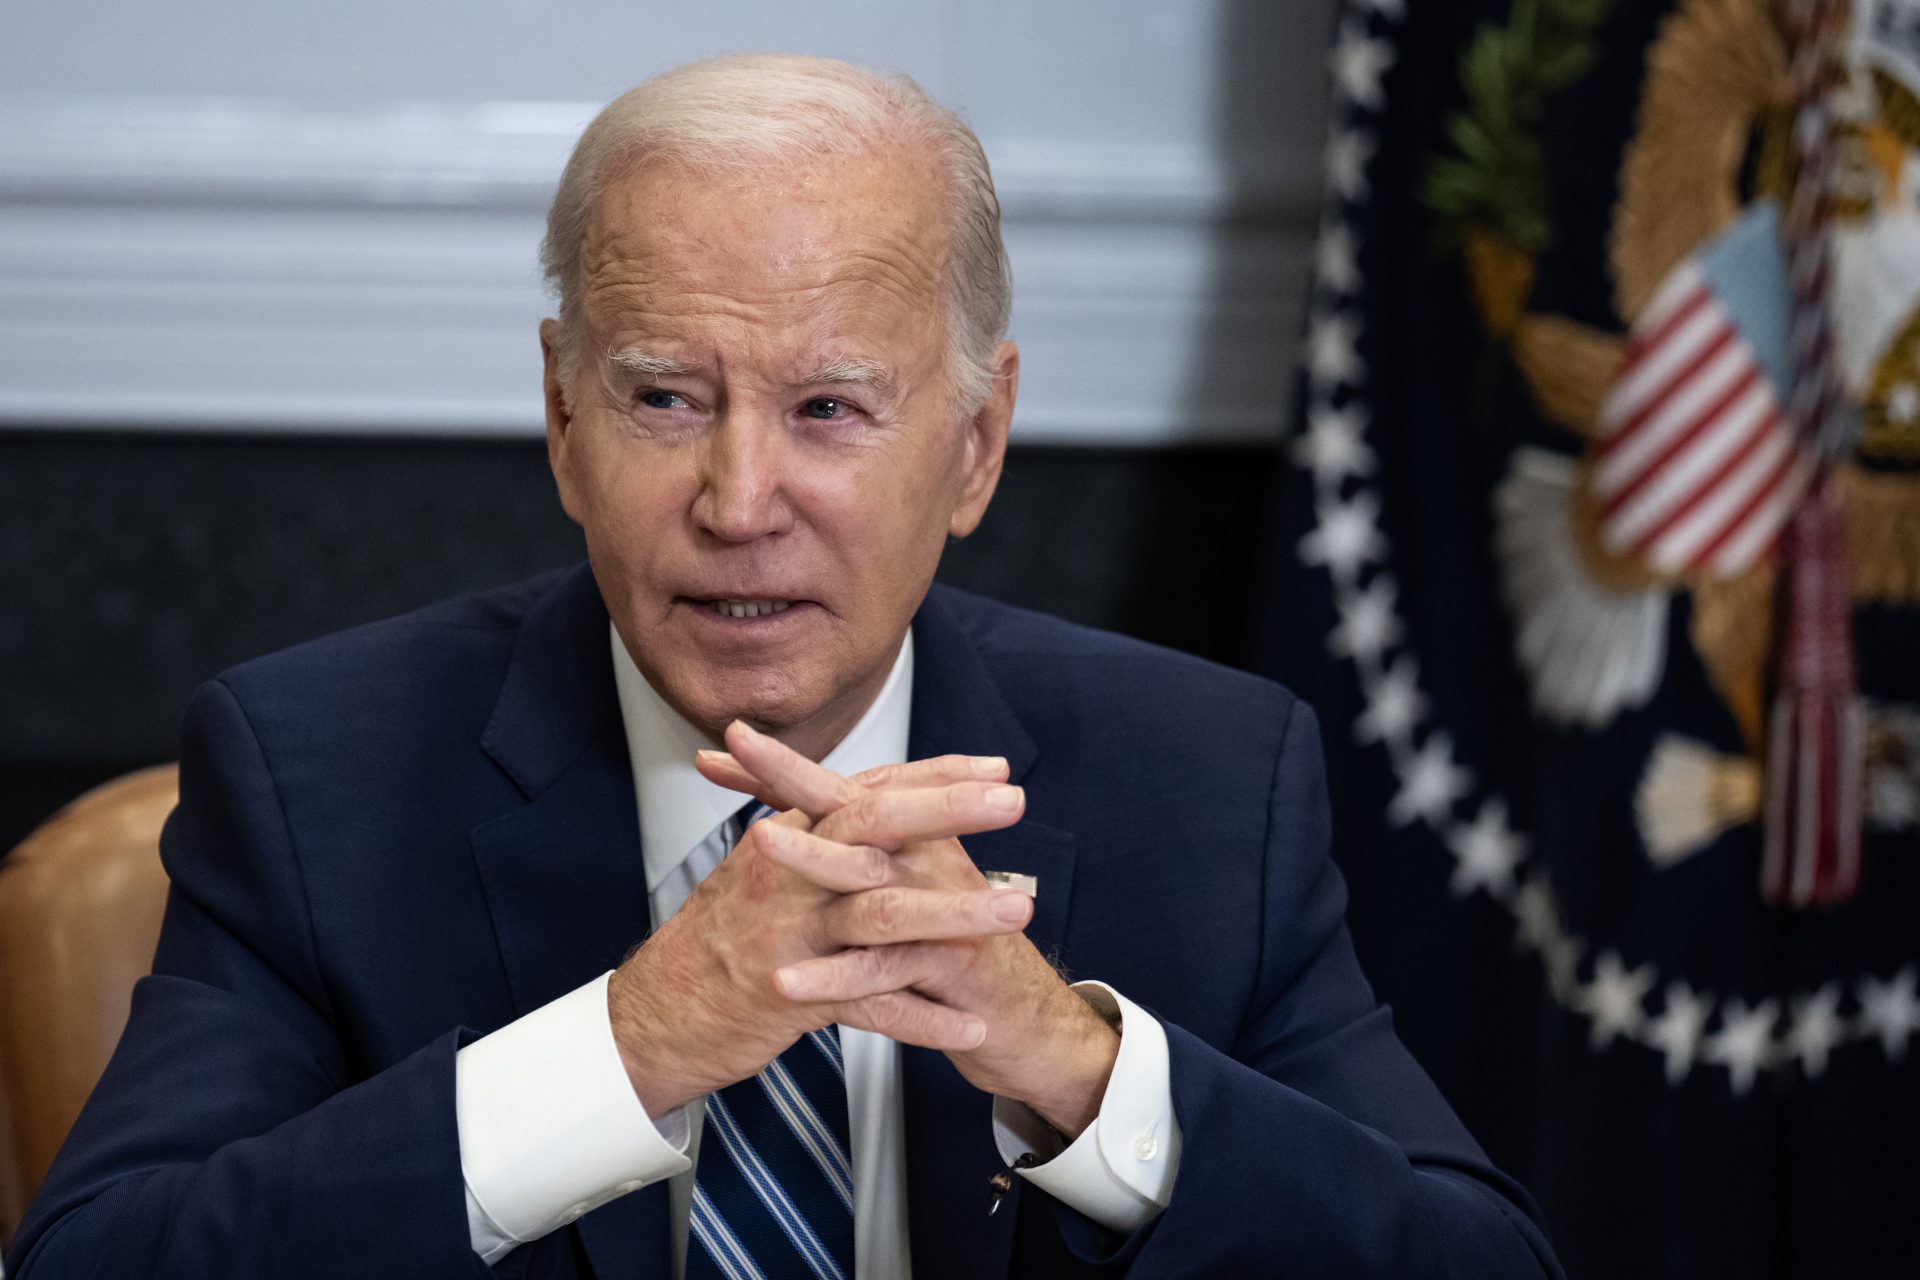 “If he gets the nomination, it’ll be Biden.’’